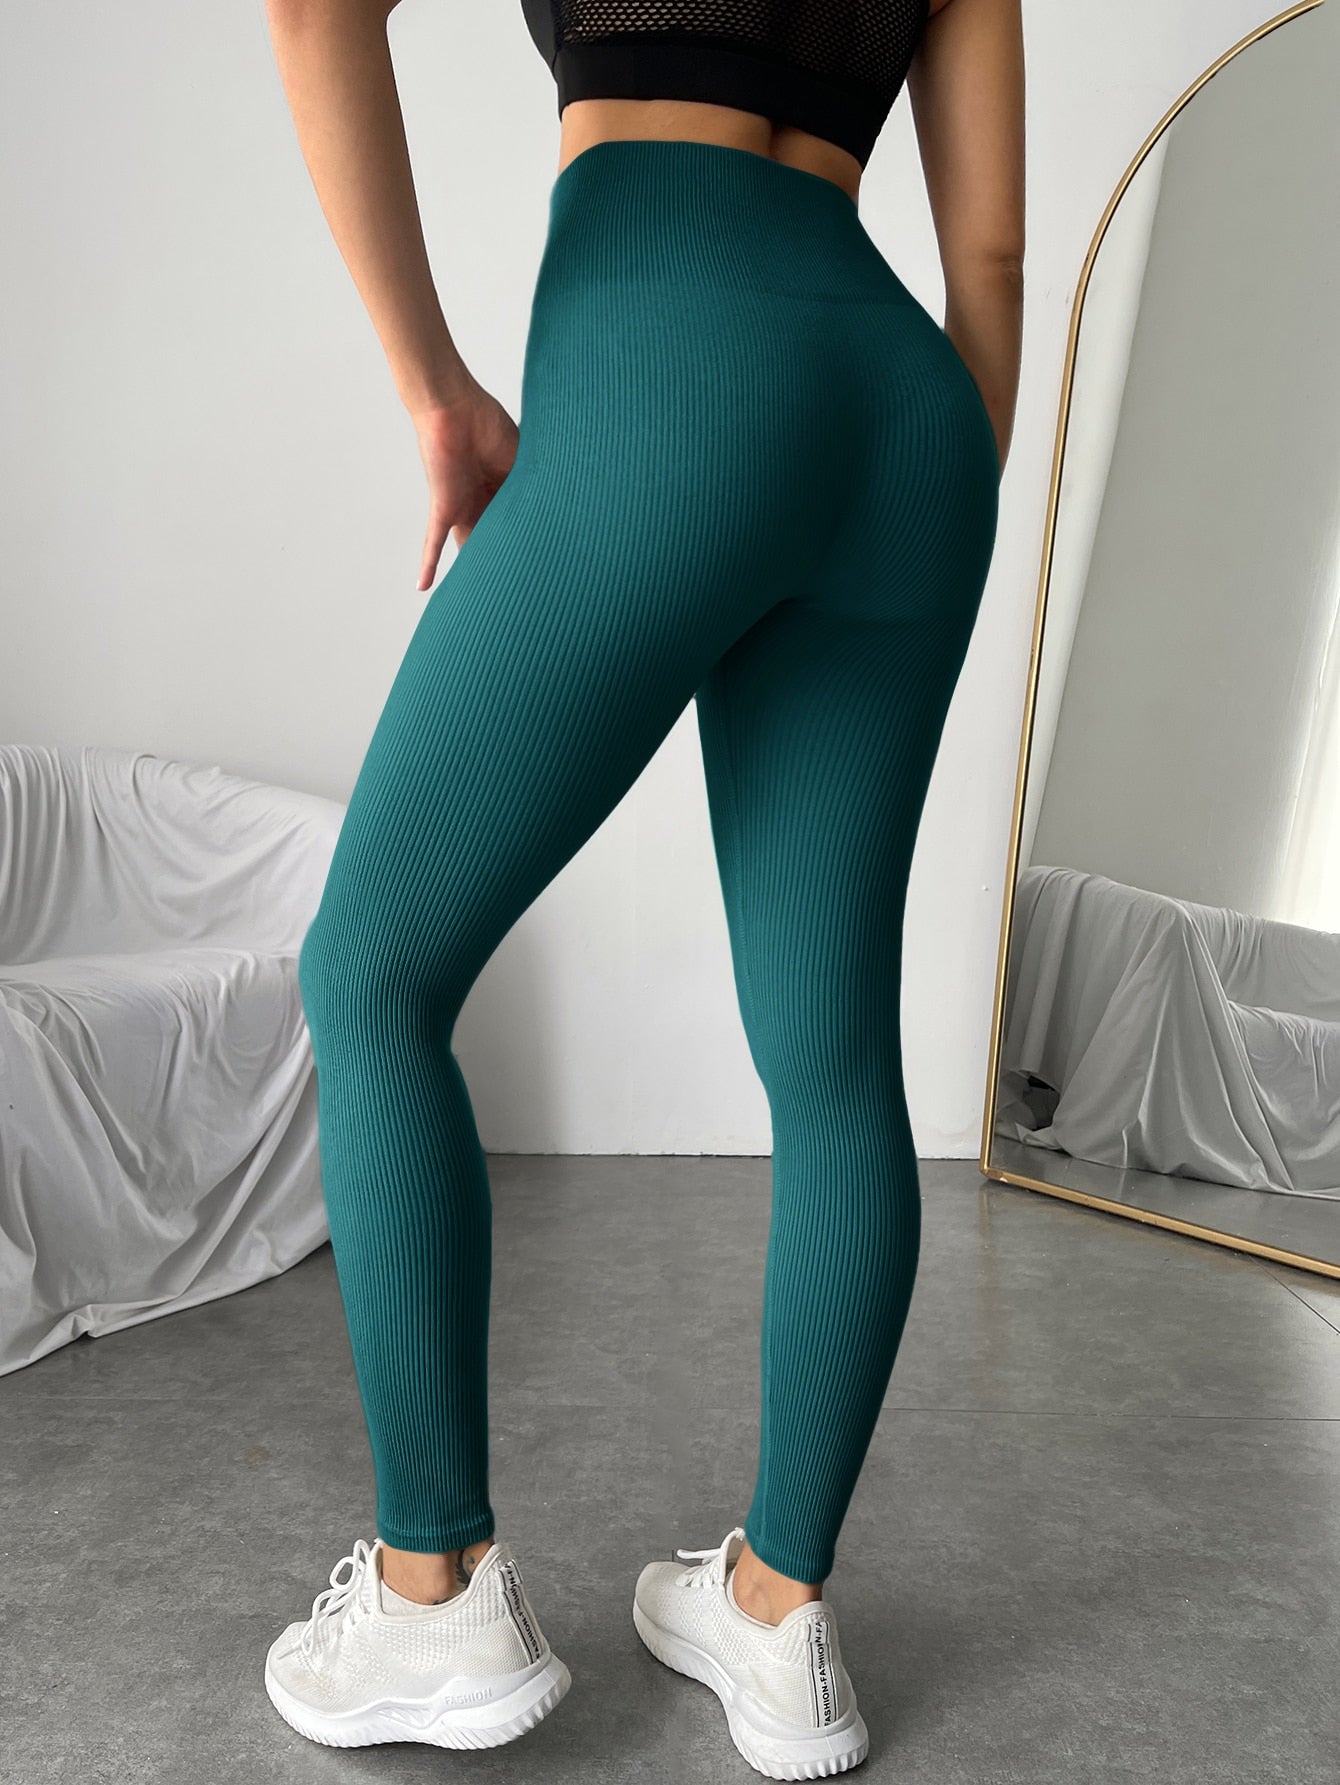 Yoga Leggings Seamless Rib Knit Tummy Control Training Tights With Wide Waistband Workout Leggings Spandex